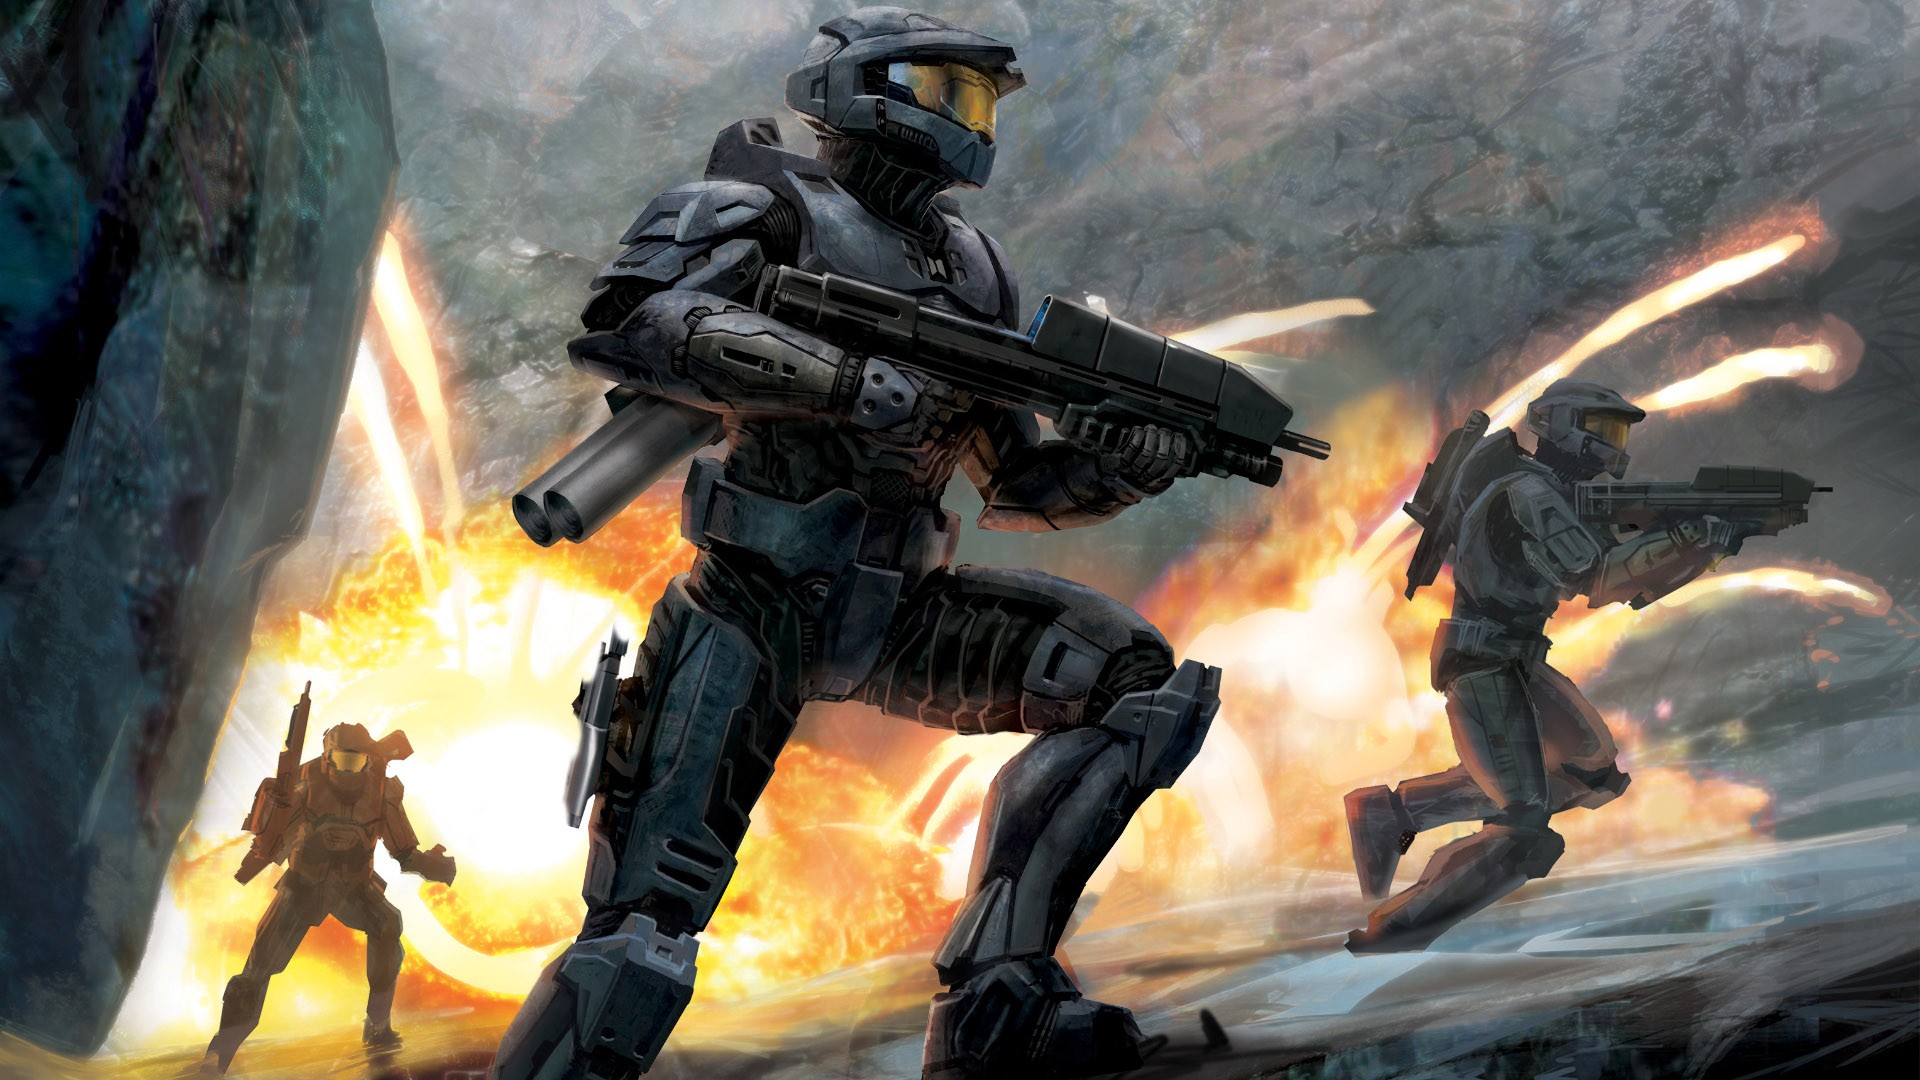 Video Games Spartans Halo Halo Video Game Art Science Fiction 1920x1080